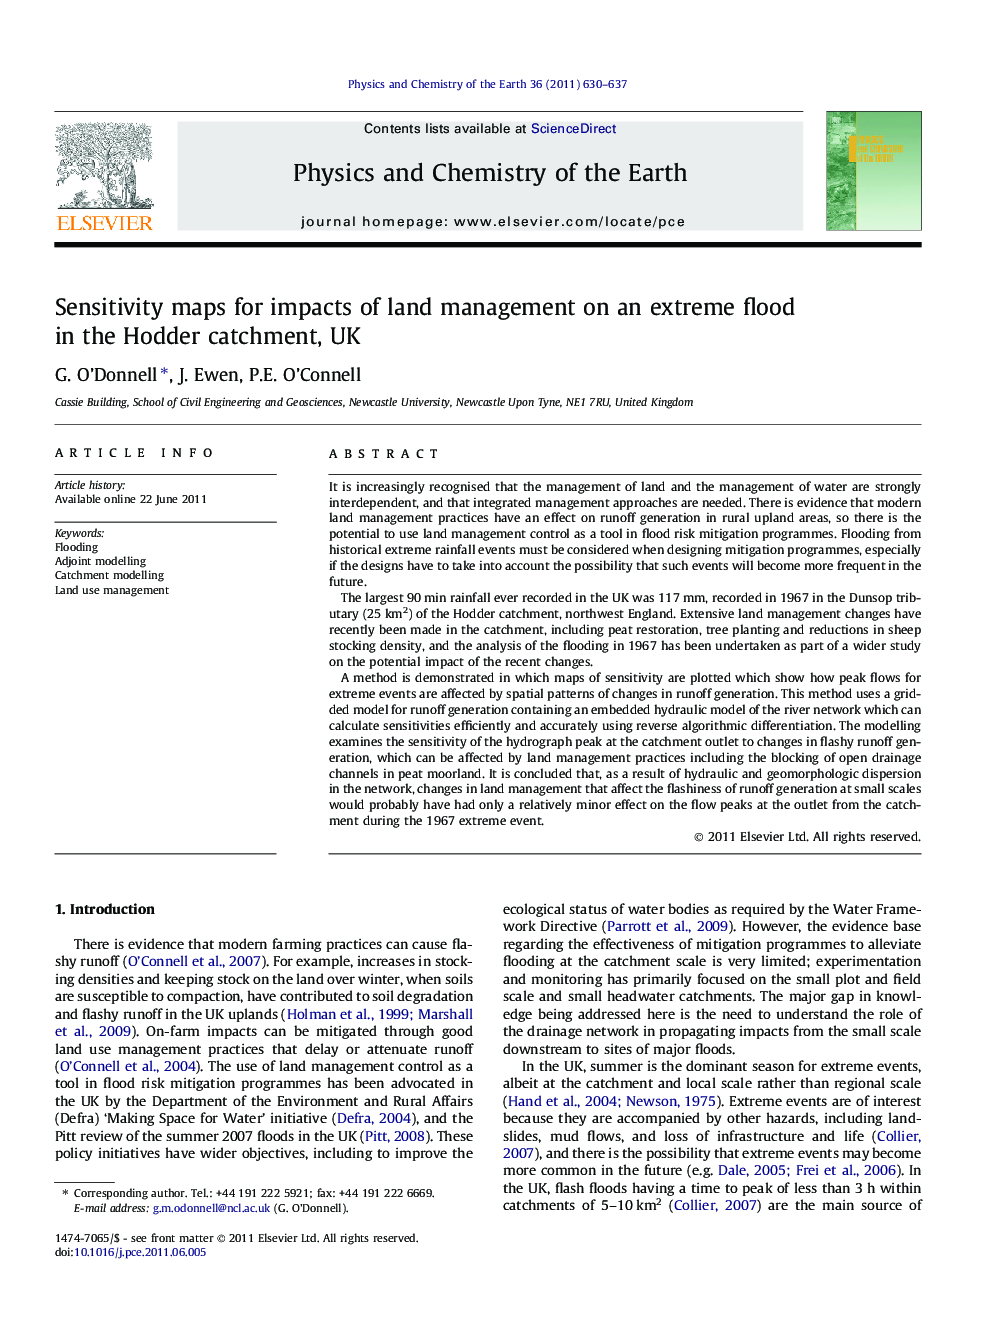 Sensitivity maps for impacts of land management on an extreme flood in the Hodder catchment, UK